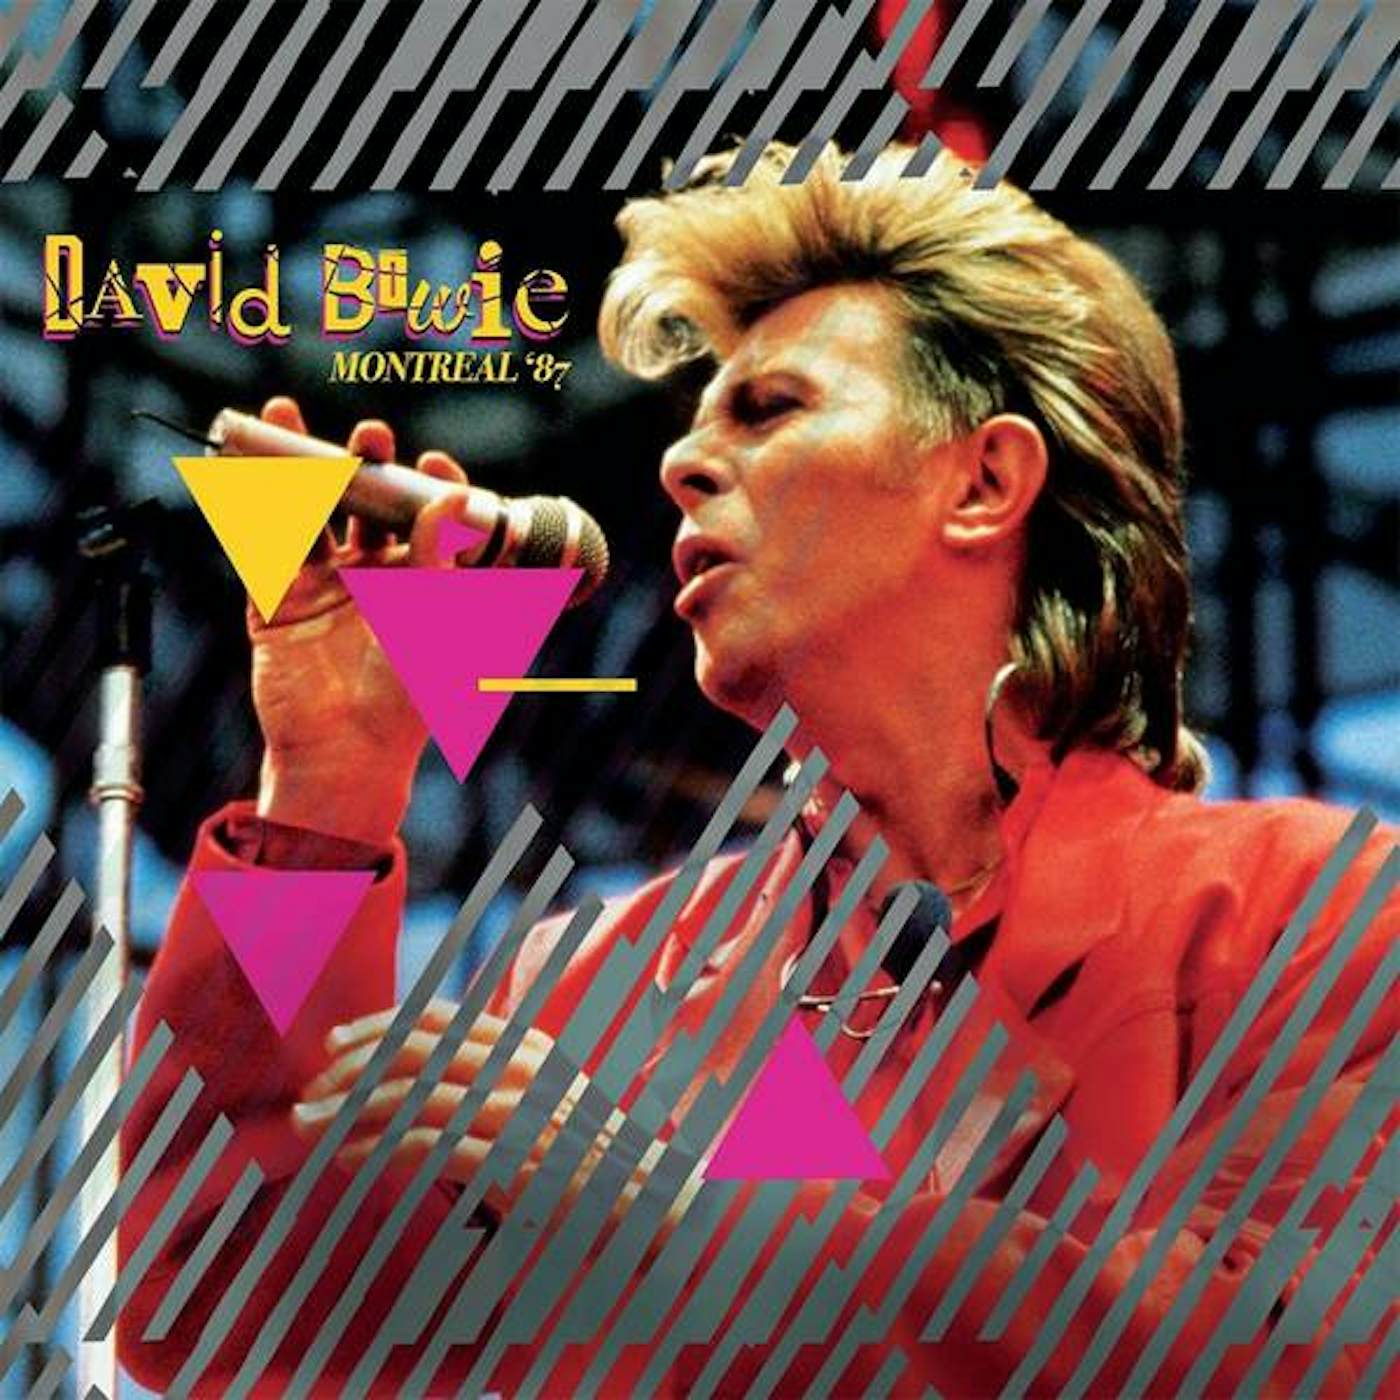 David Bowie Montreal '87 (Limited/Pink) Vinyl Record